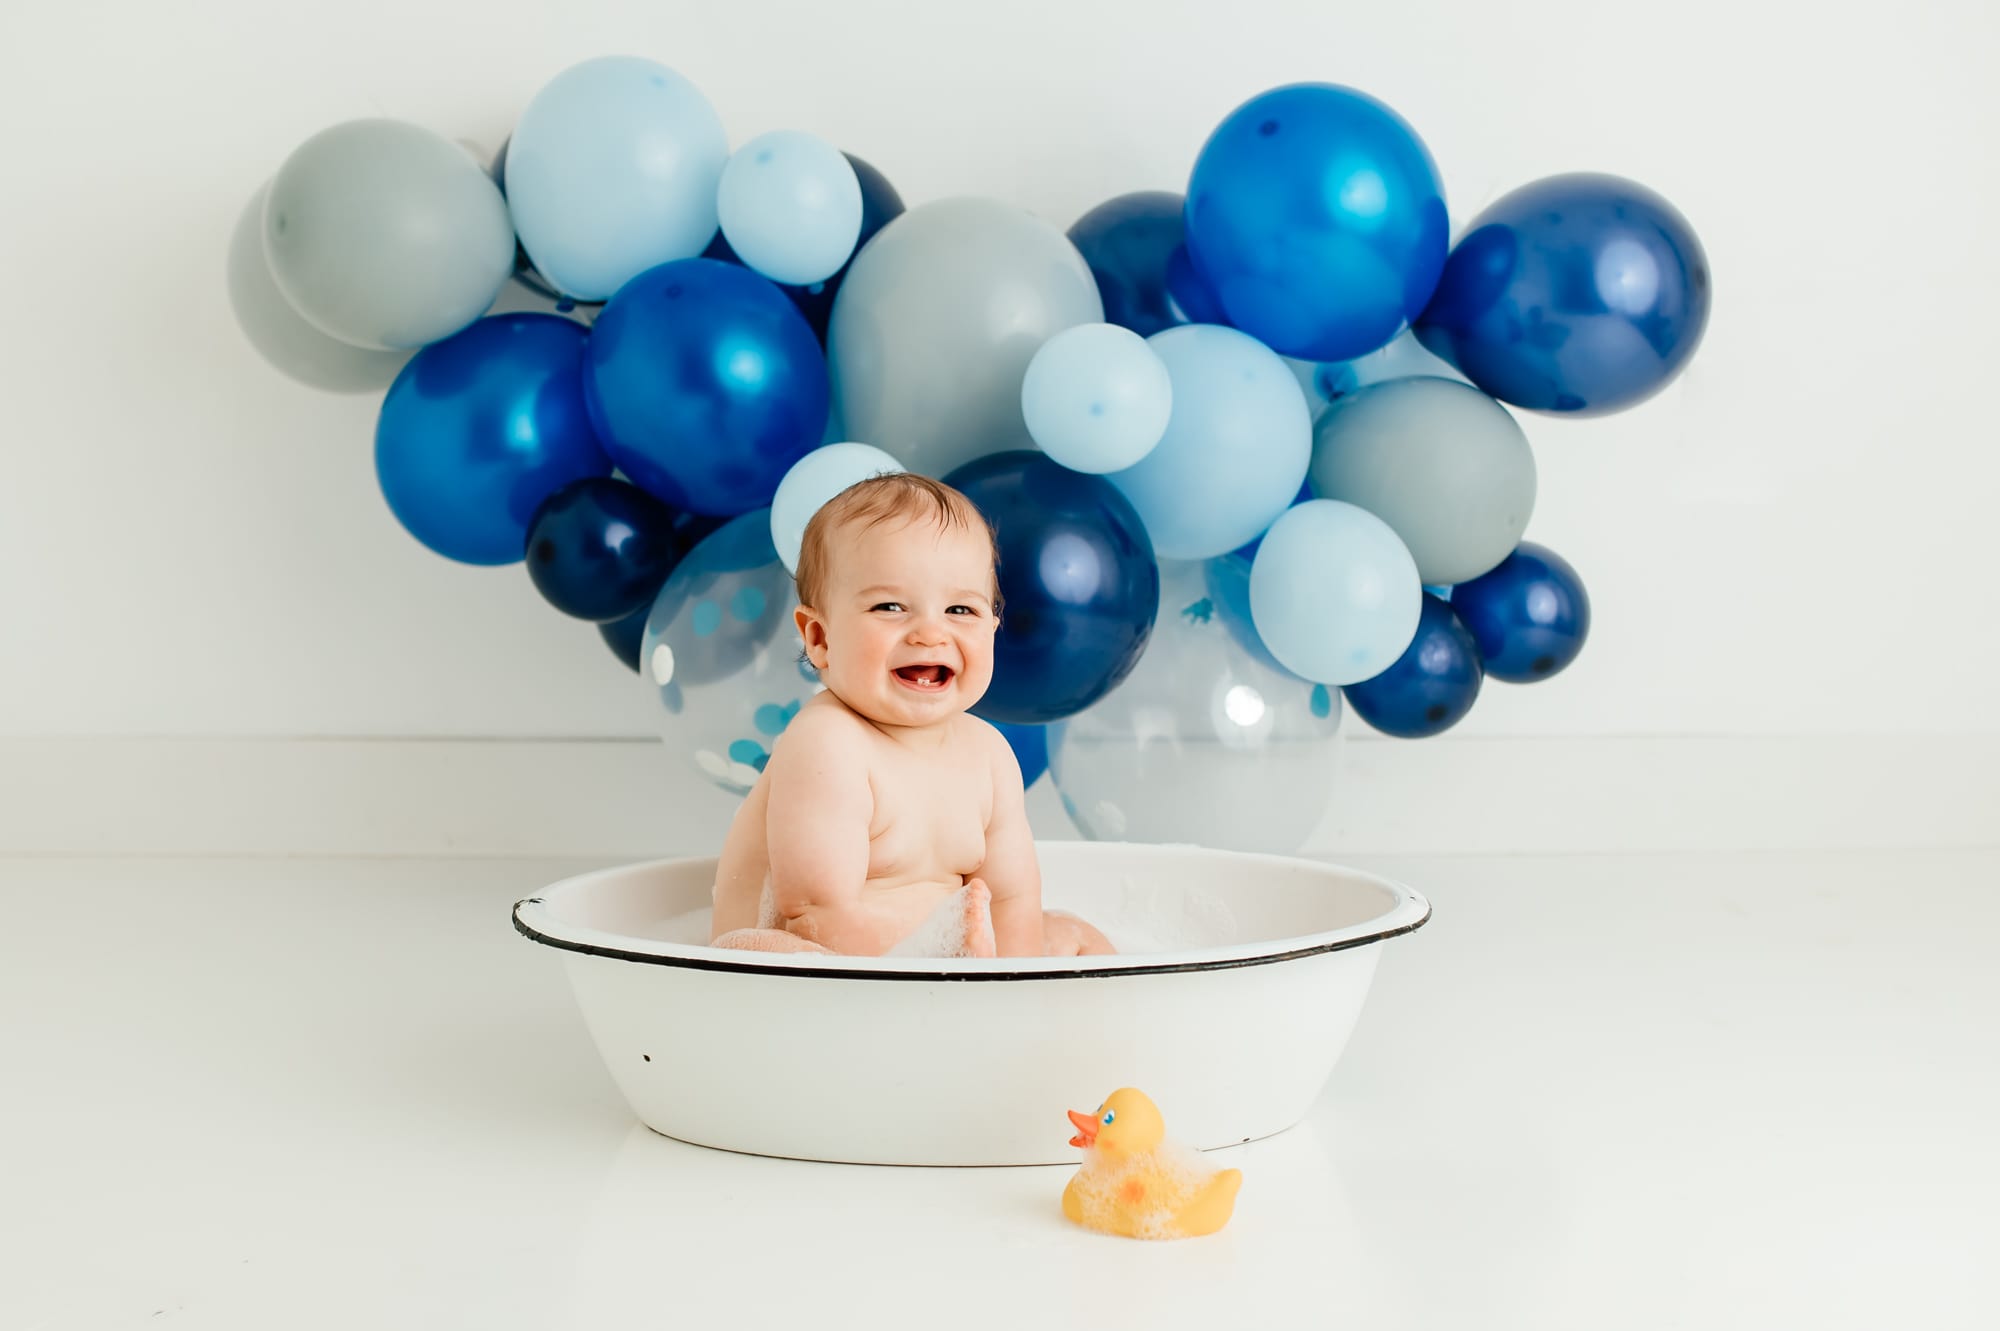 Bubble bath session in vintage tub with blue balloon garland.